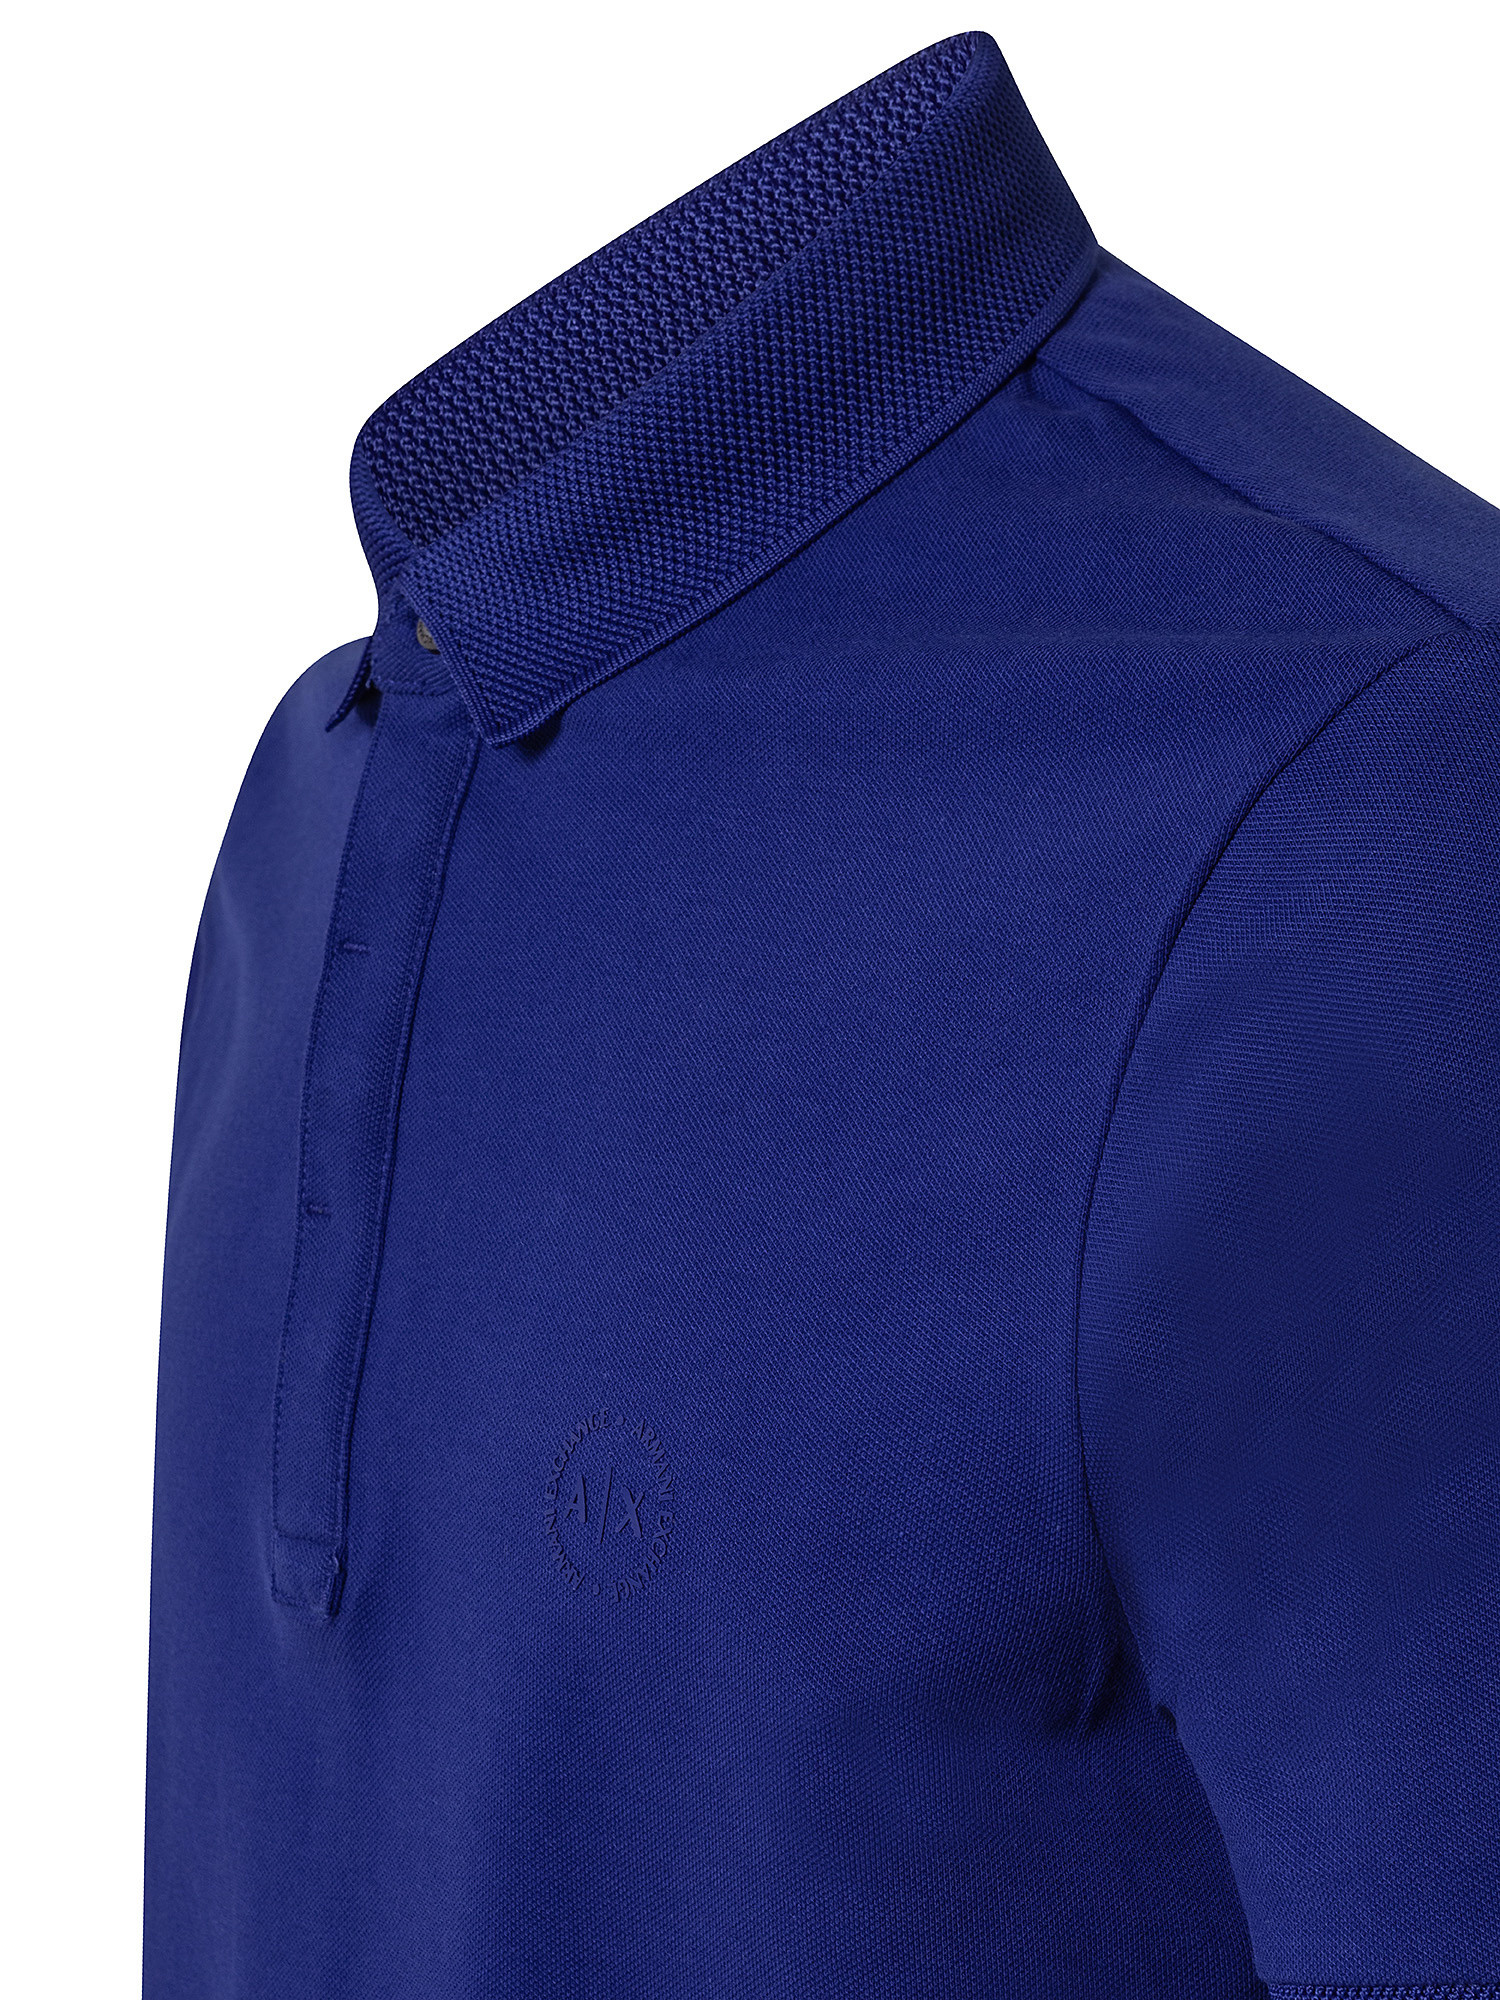 Polo, Blu scuro, large image number 2